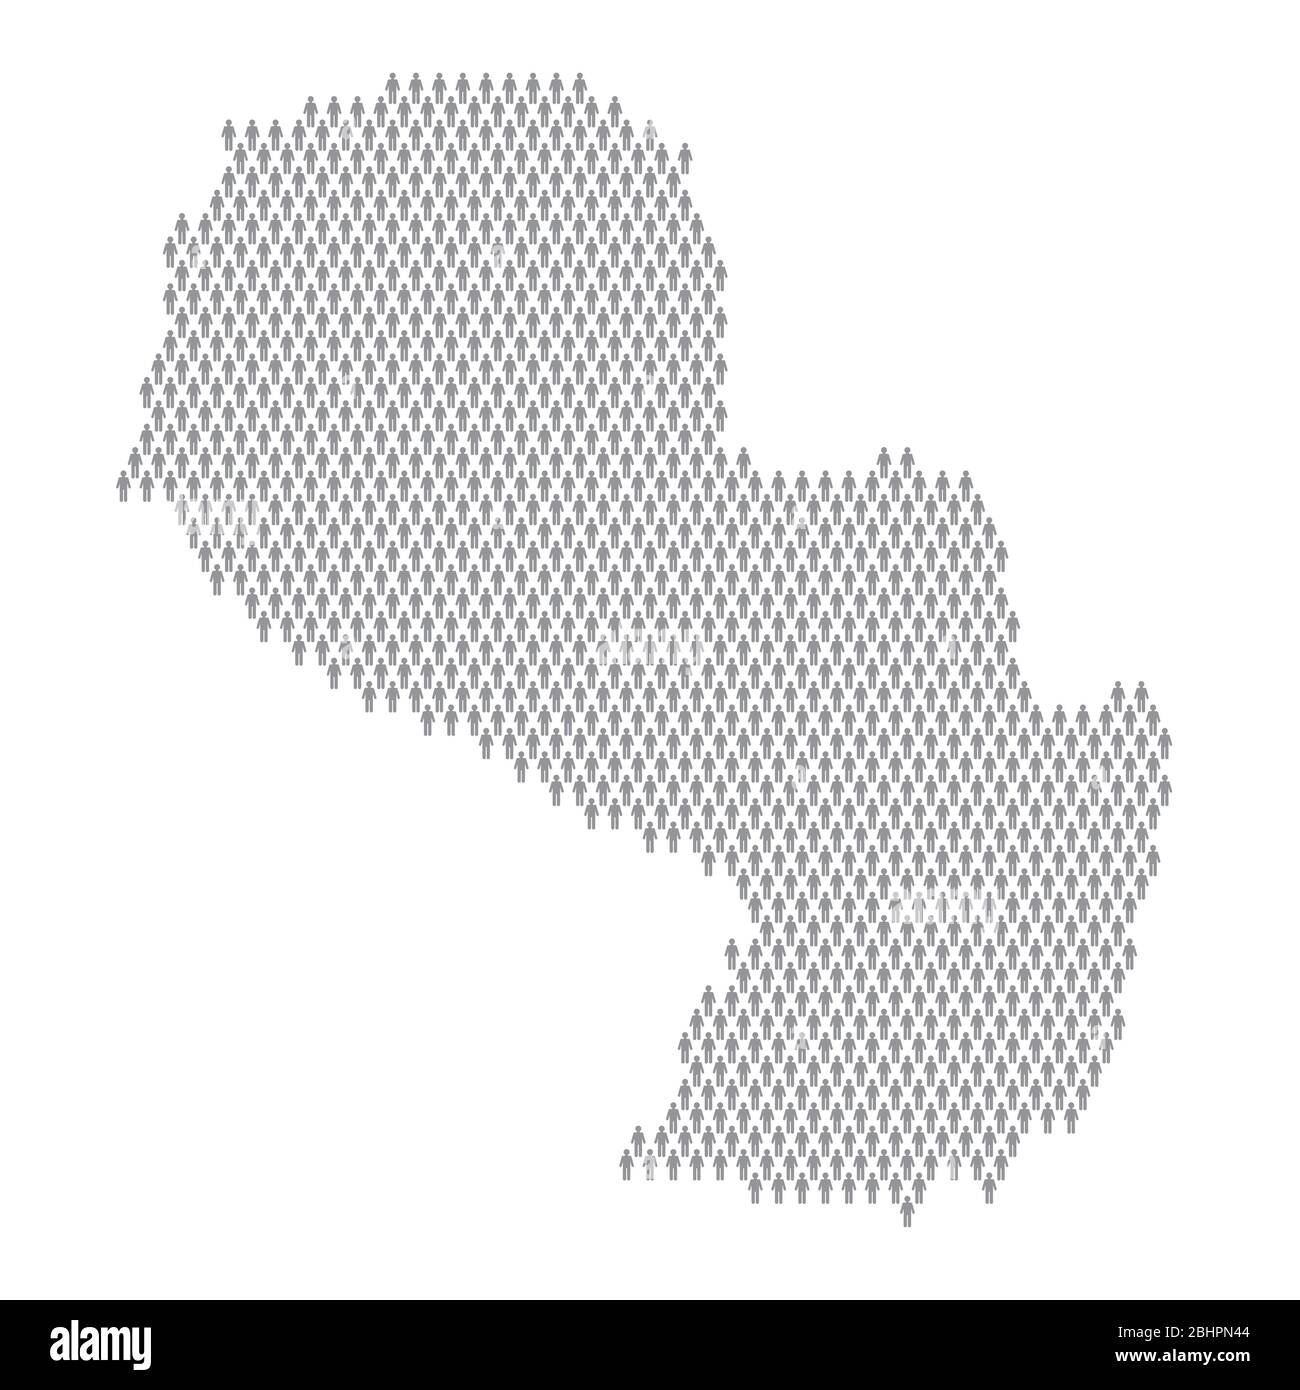 Paraguay population infographic. Map made from stick figure people Stock Vector